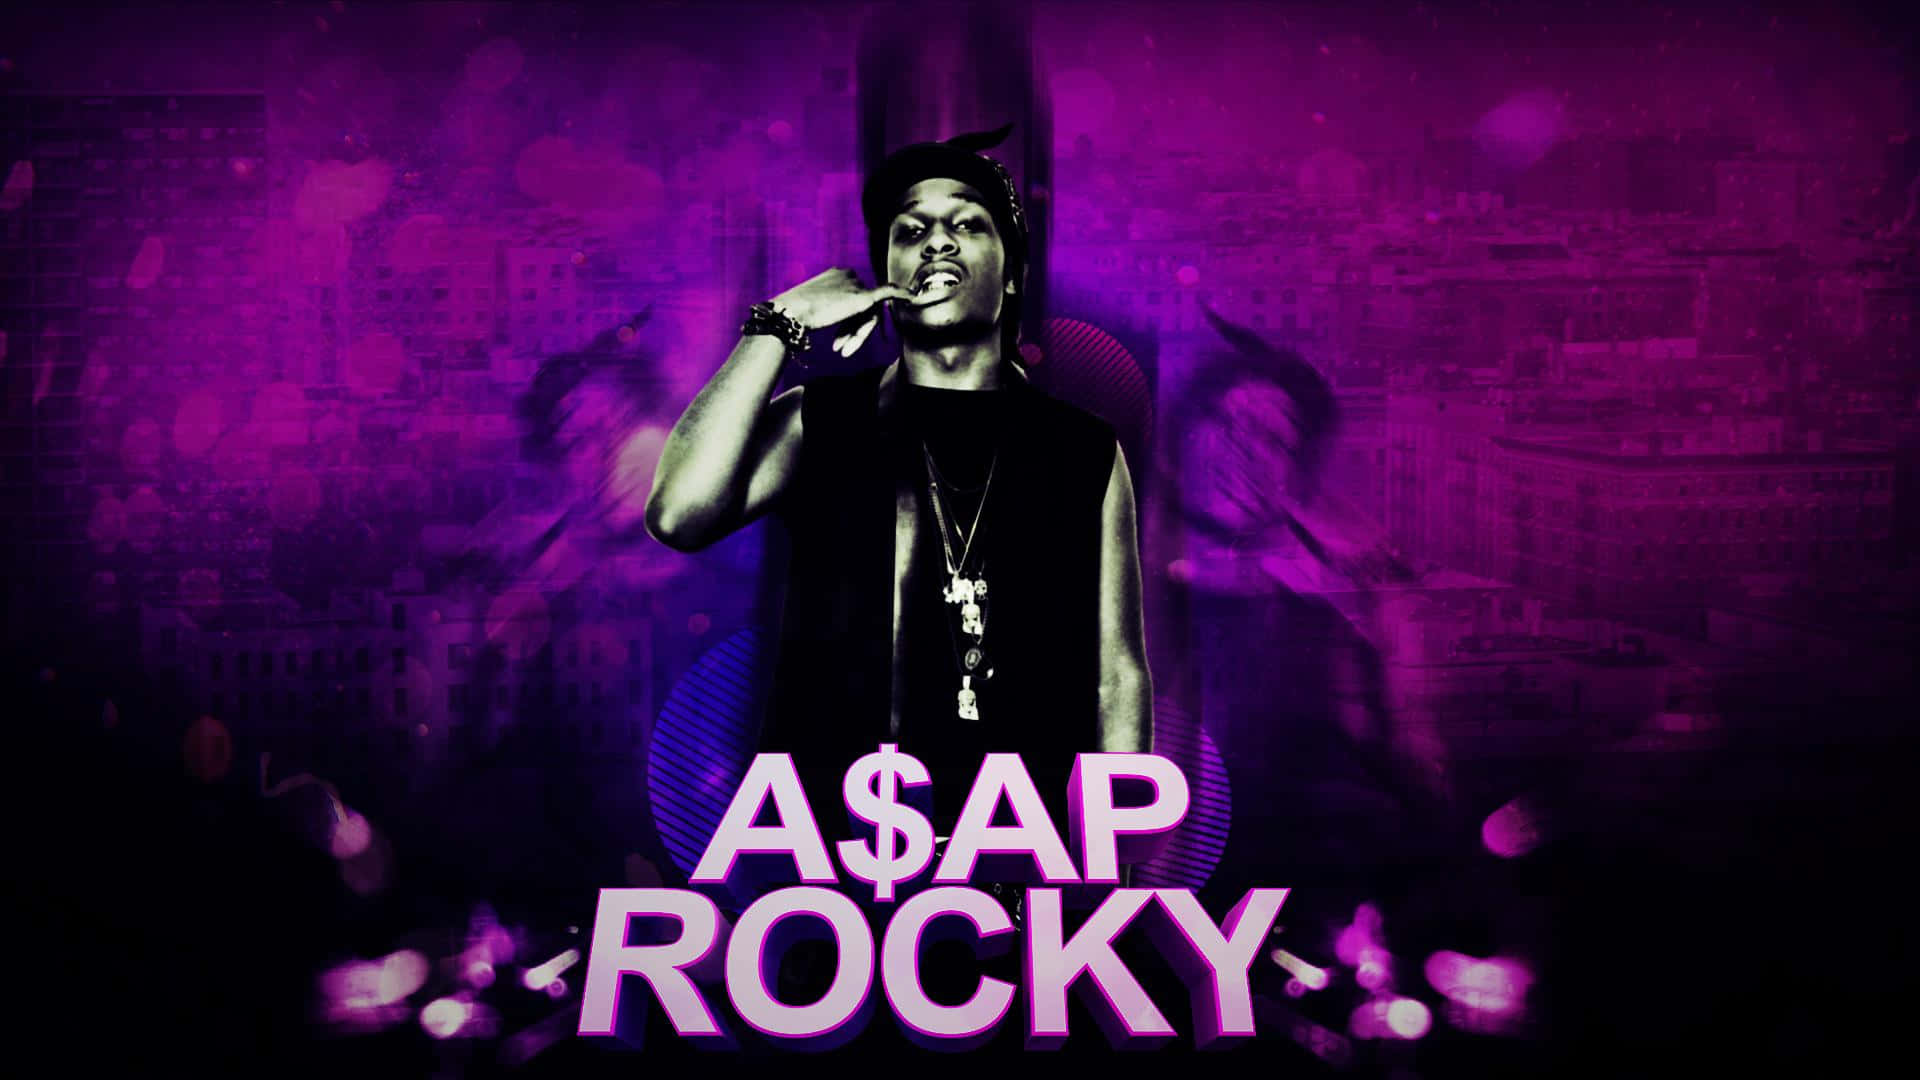 ASAP Rocky stands out among successful American music artists